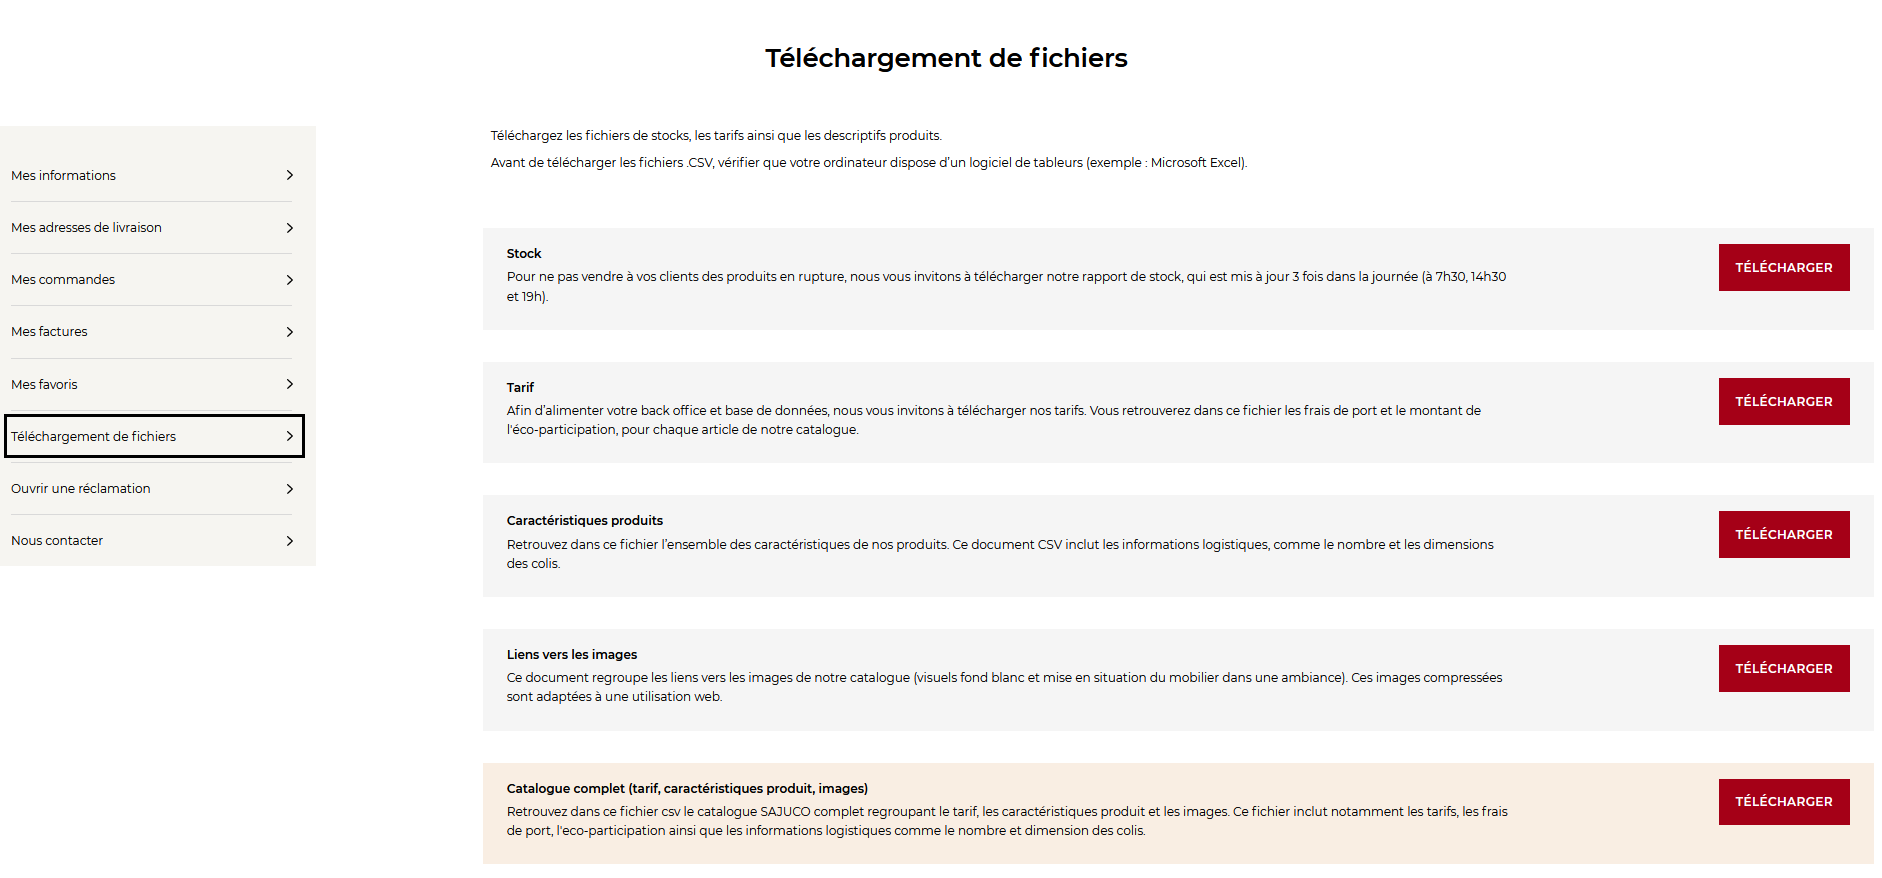 telechargement-fichiers.PNG